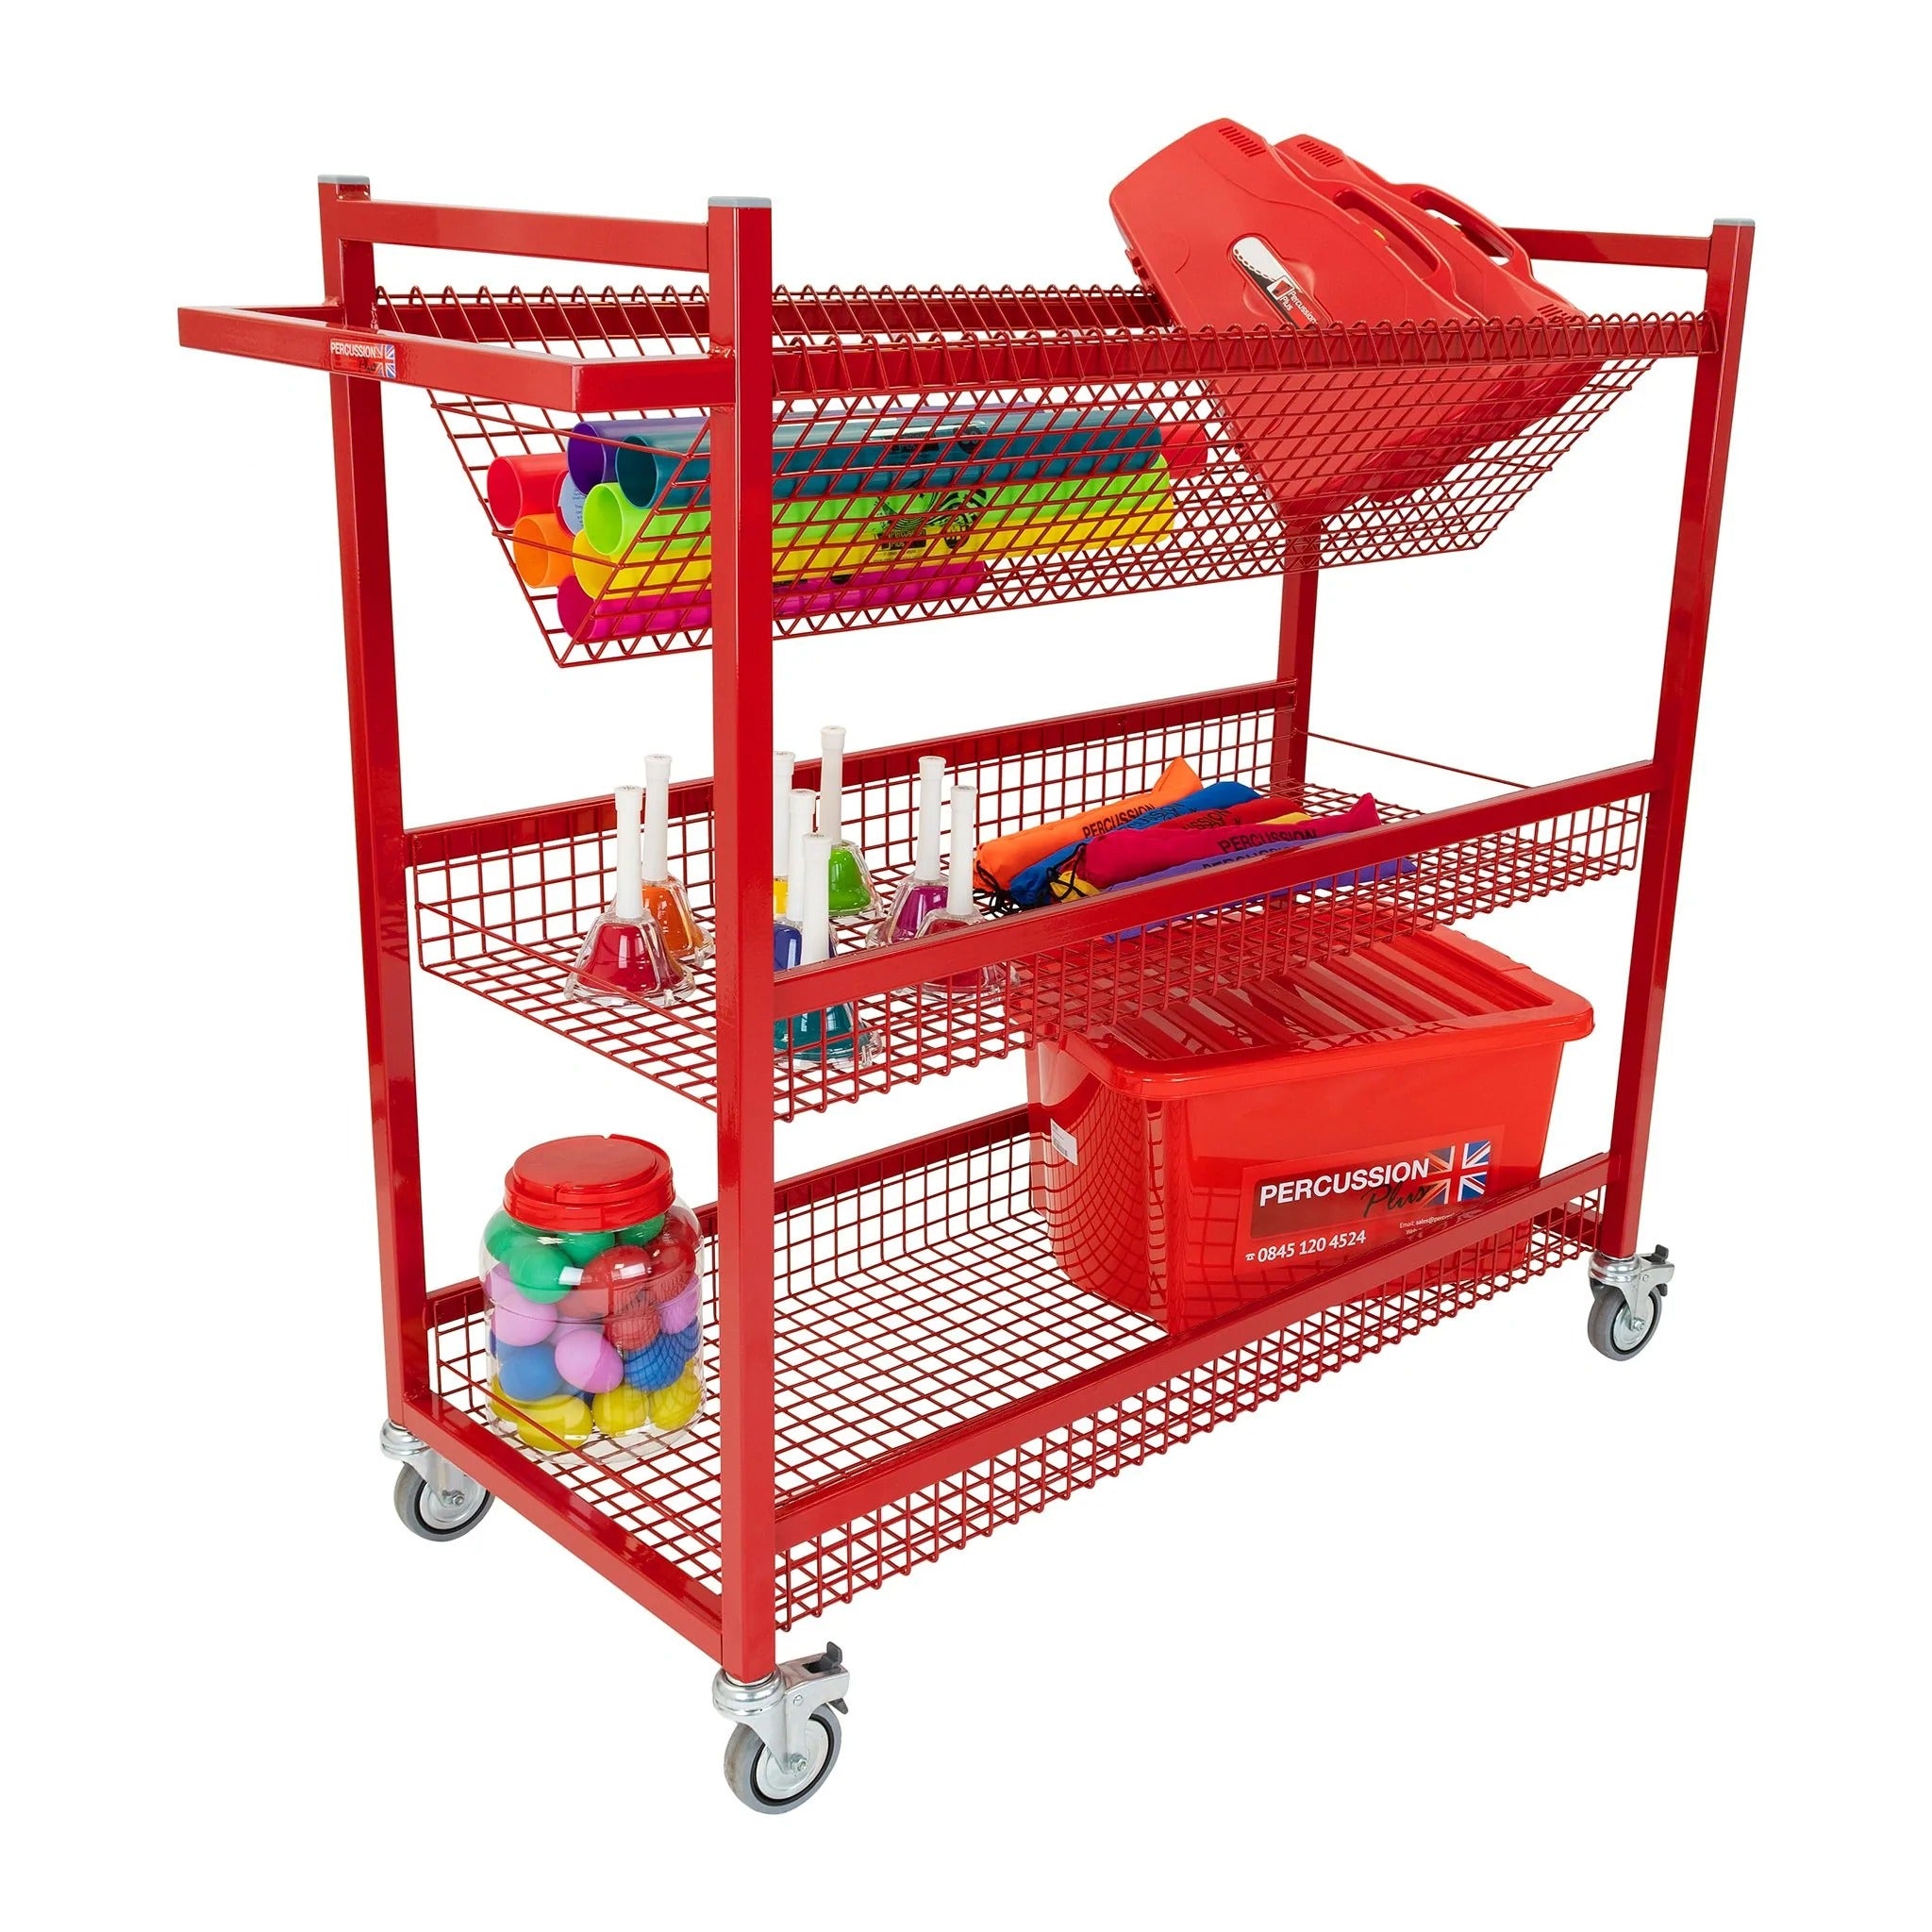 Percussion trolley with wire shelves, The Percussion Plus mobile instrument trolley is the perfect solution to classroom storage. The castors on the bottom allow great mobility and movement around the classroom. With 3 tier wire shelves included, this trolley is supplied fully assembled so there is no need to fiddle around with screws. The construction consists of a durable metal framework finished in a vibrant red. 3 tier wire shelves included A great option for classroom storage Castors for mobility aroun